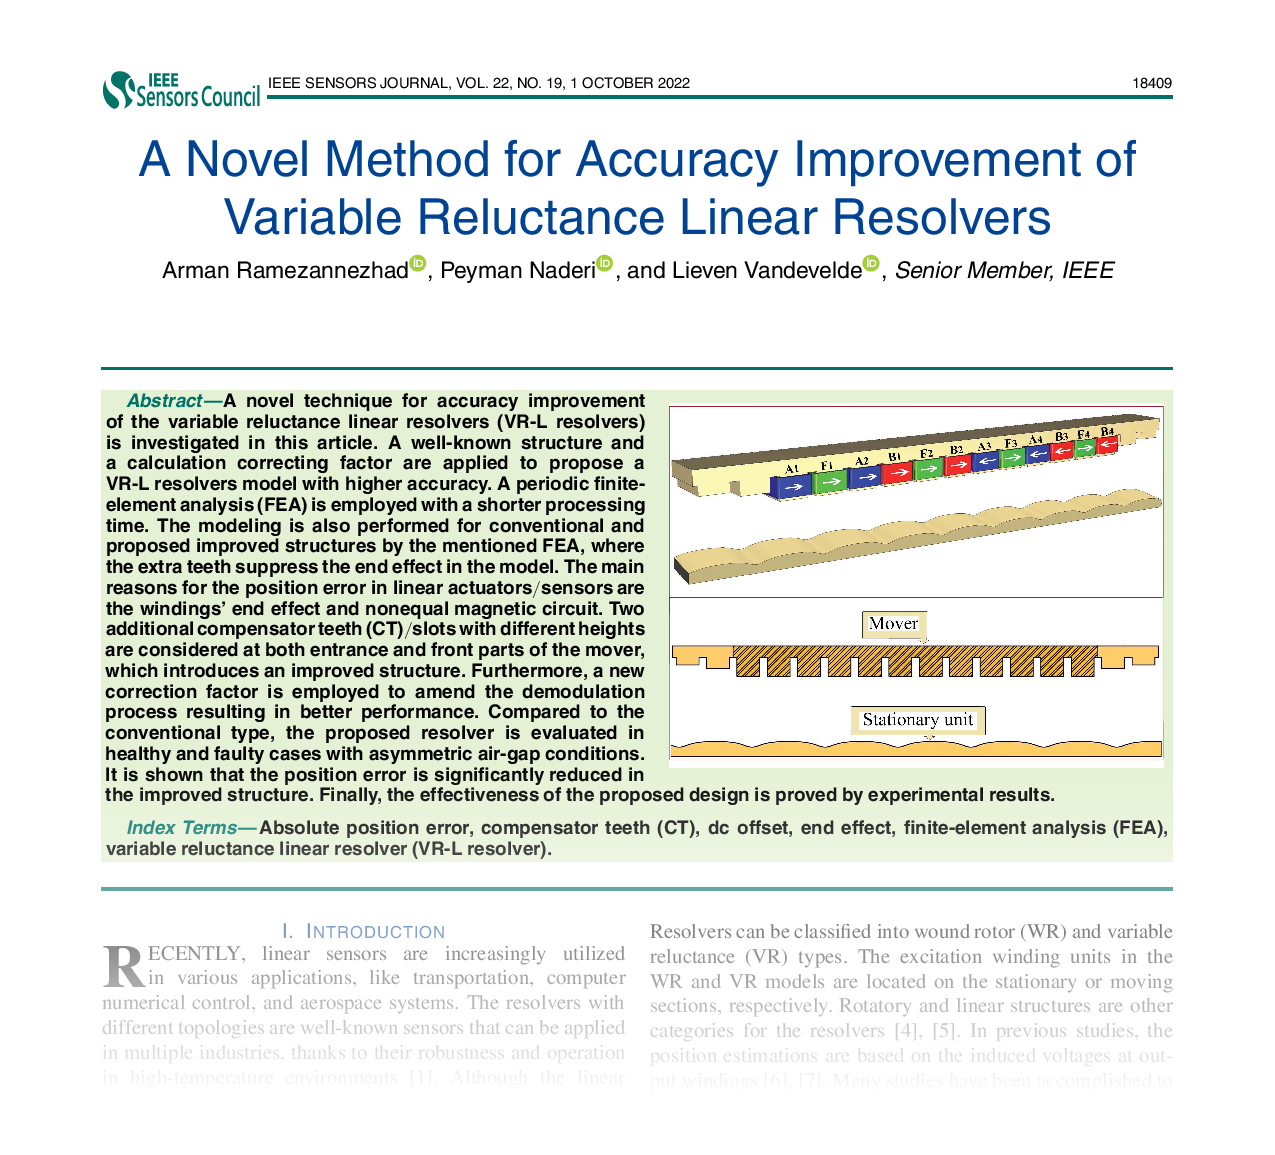 A Novel Method for Accuracy Improvement of Variable Reluctance Linear Resolvers